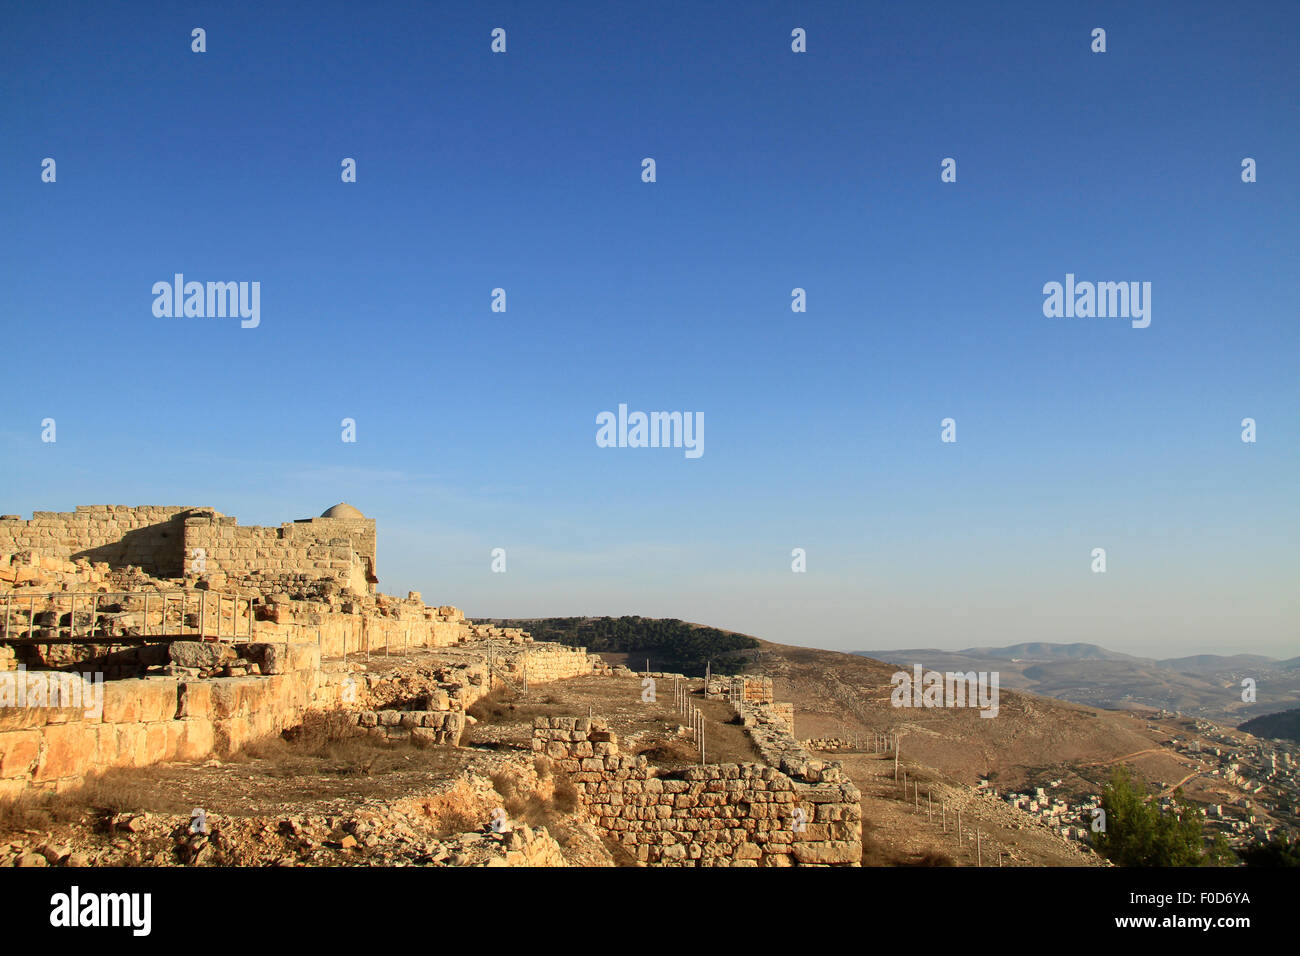 Samaria, ruins from the Hellenistic period on Mount Gerizim, tomb of Sheikh Ghanem from the 12th century is in the background Stock Photo